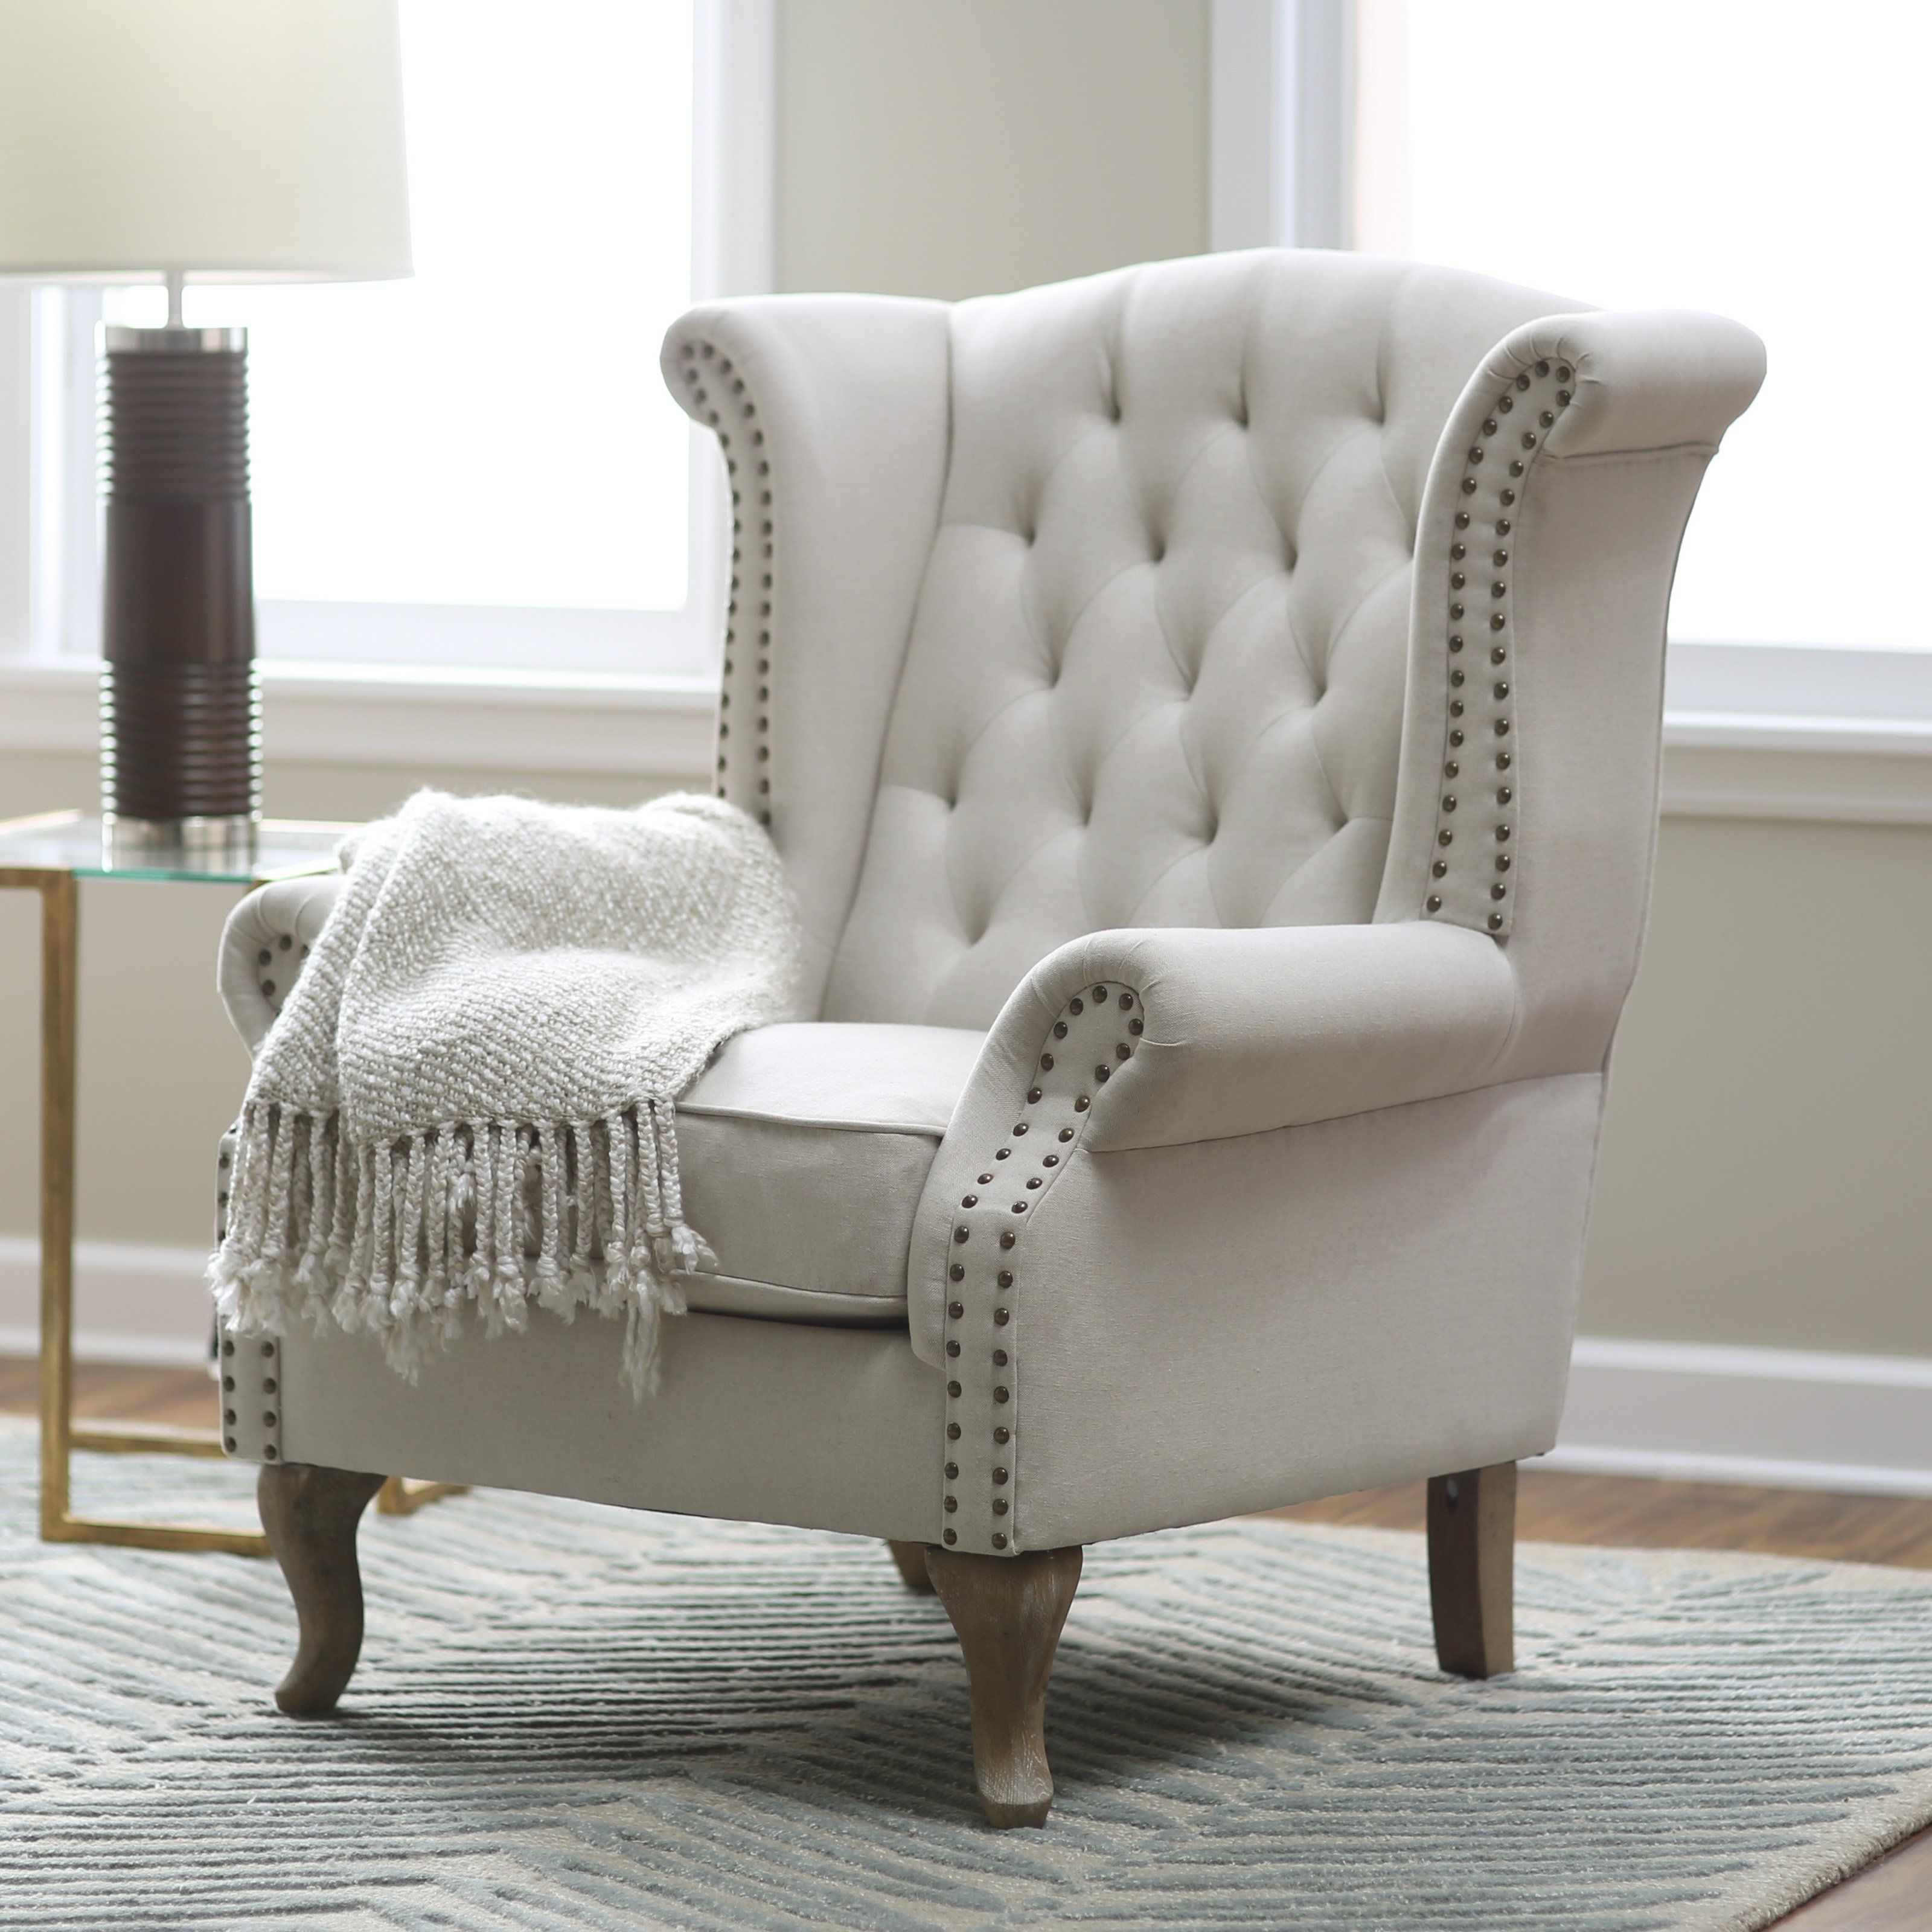 Belham Living Tatum Tufted Arm Chair With Nailheads | Dreamhome Inside Patterson Ii Arm Sofa Chairs (Photo 19 of 20)